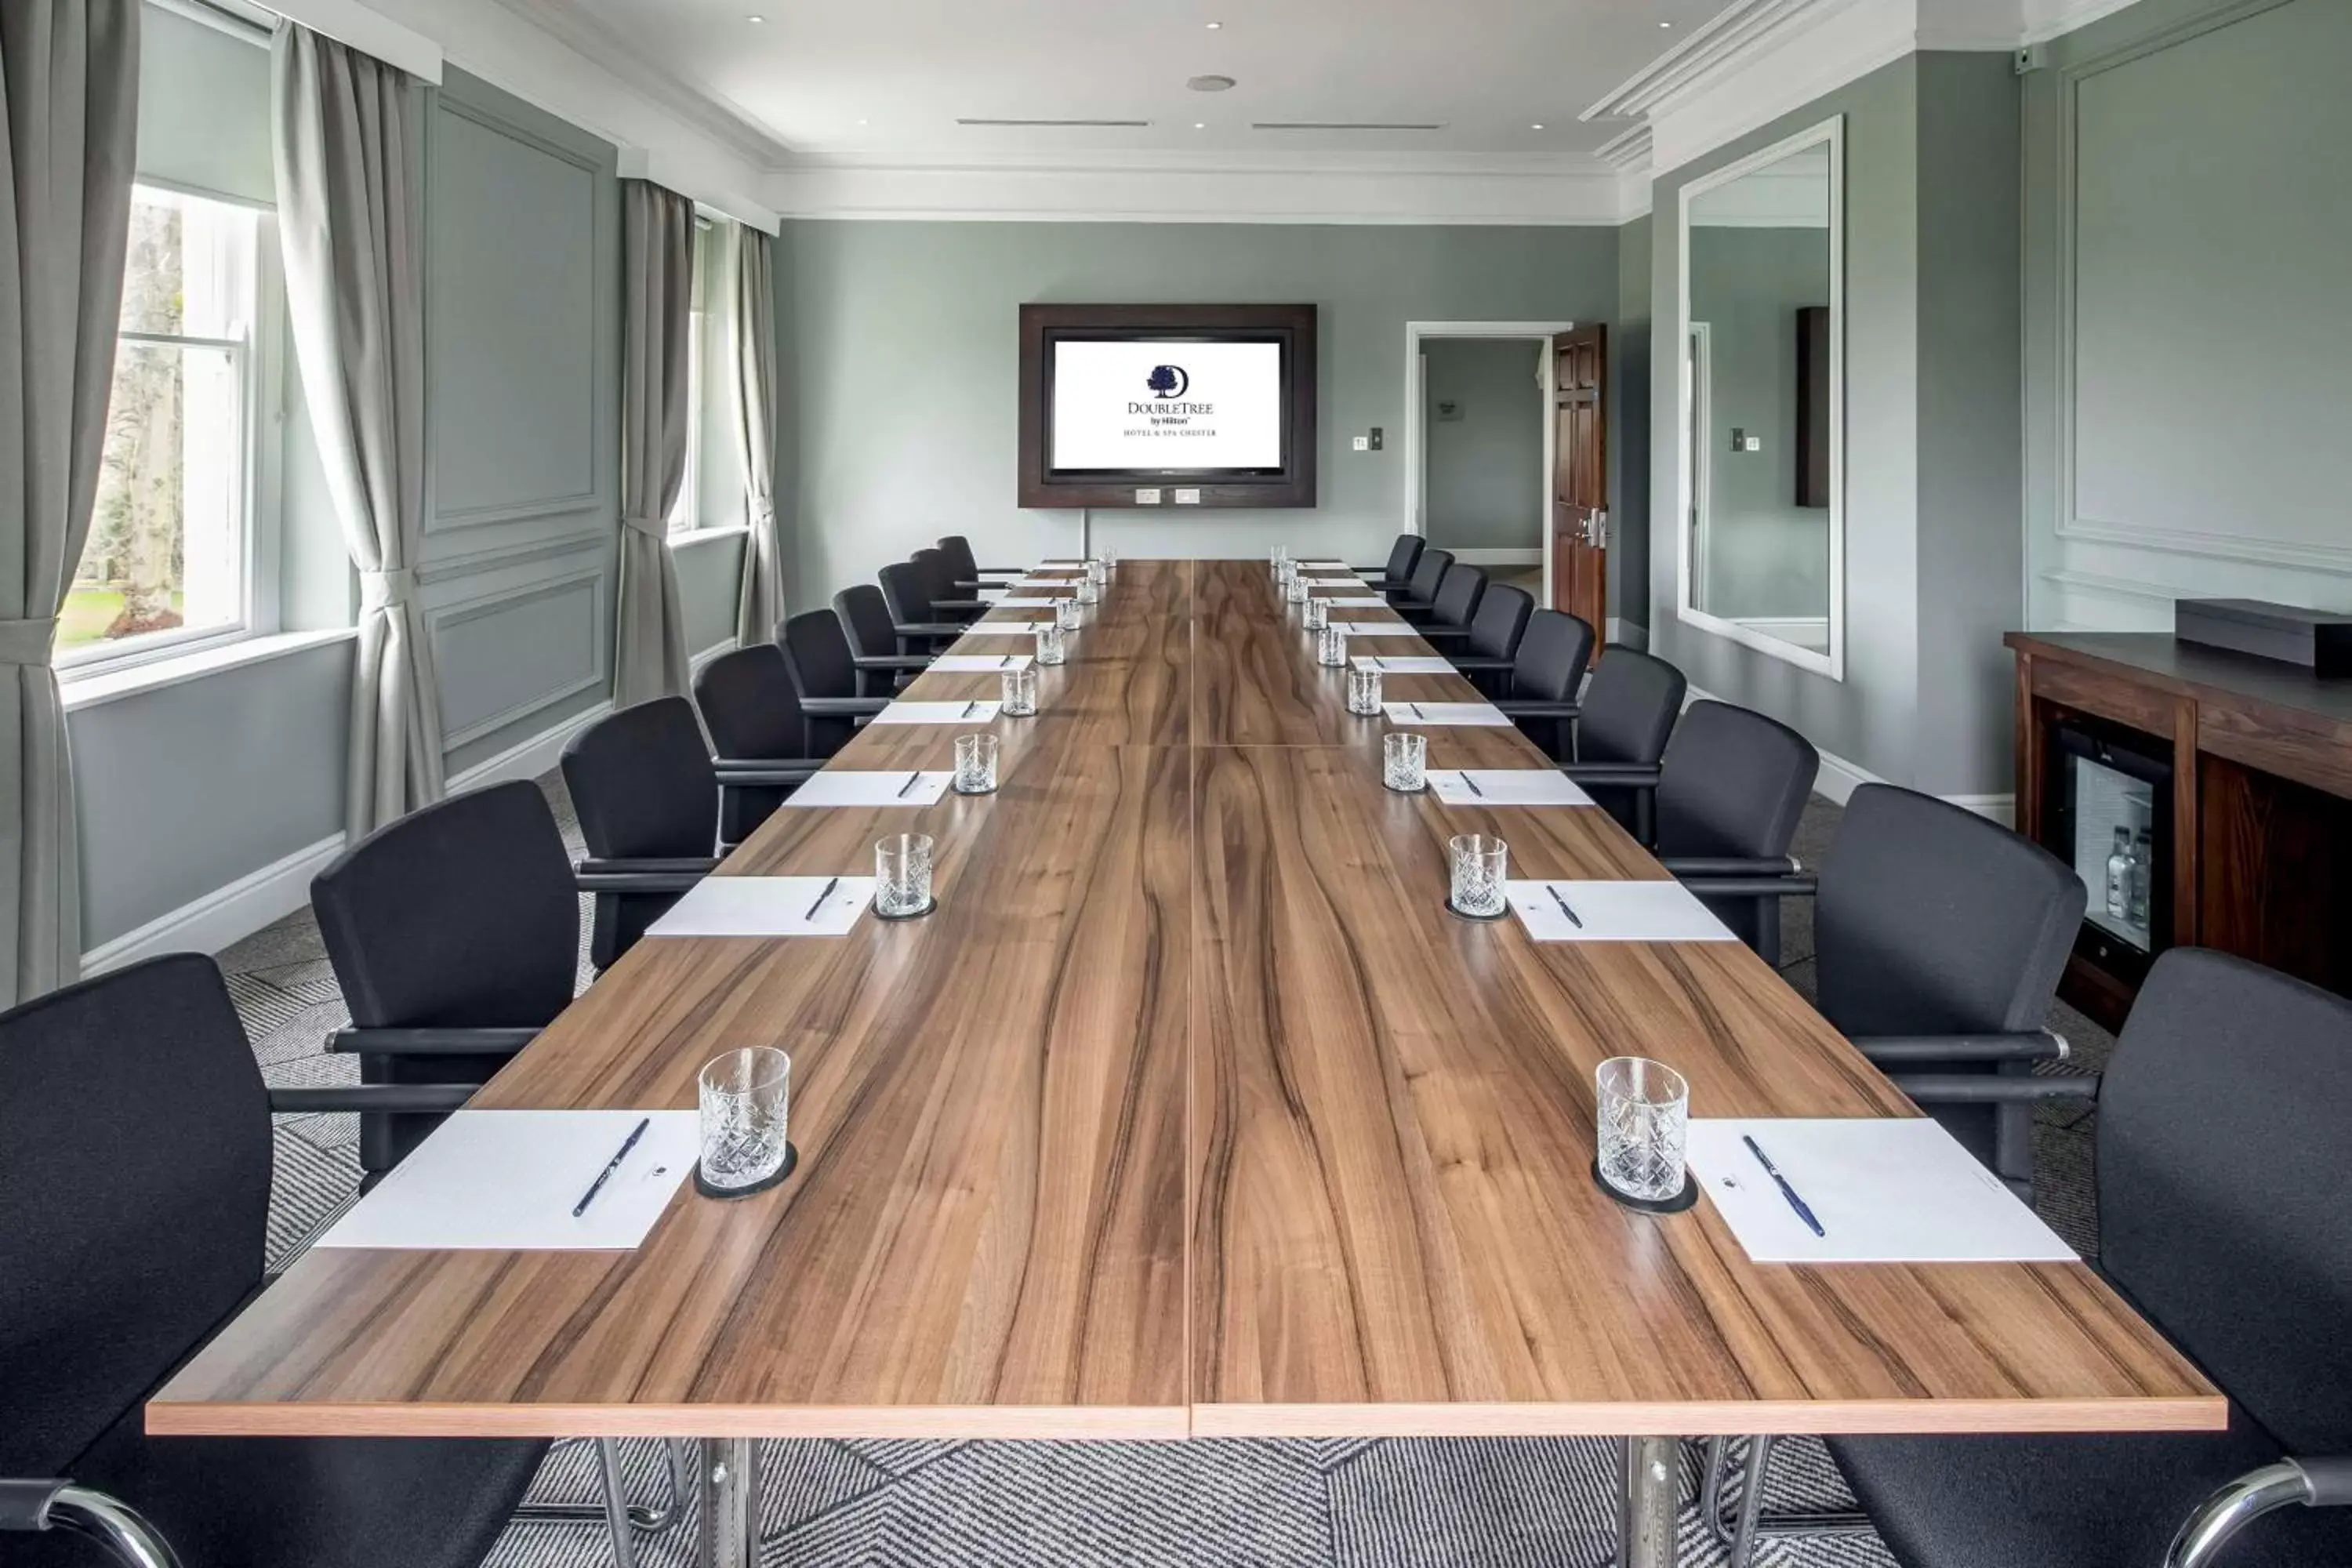 Meeting/conference room in DoubleTree by Hilton Chester